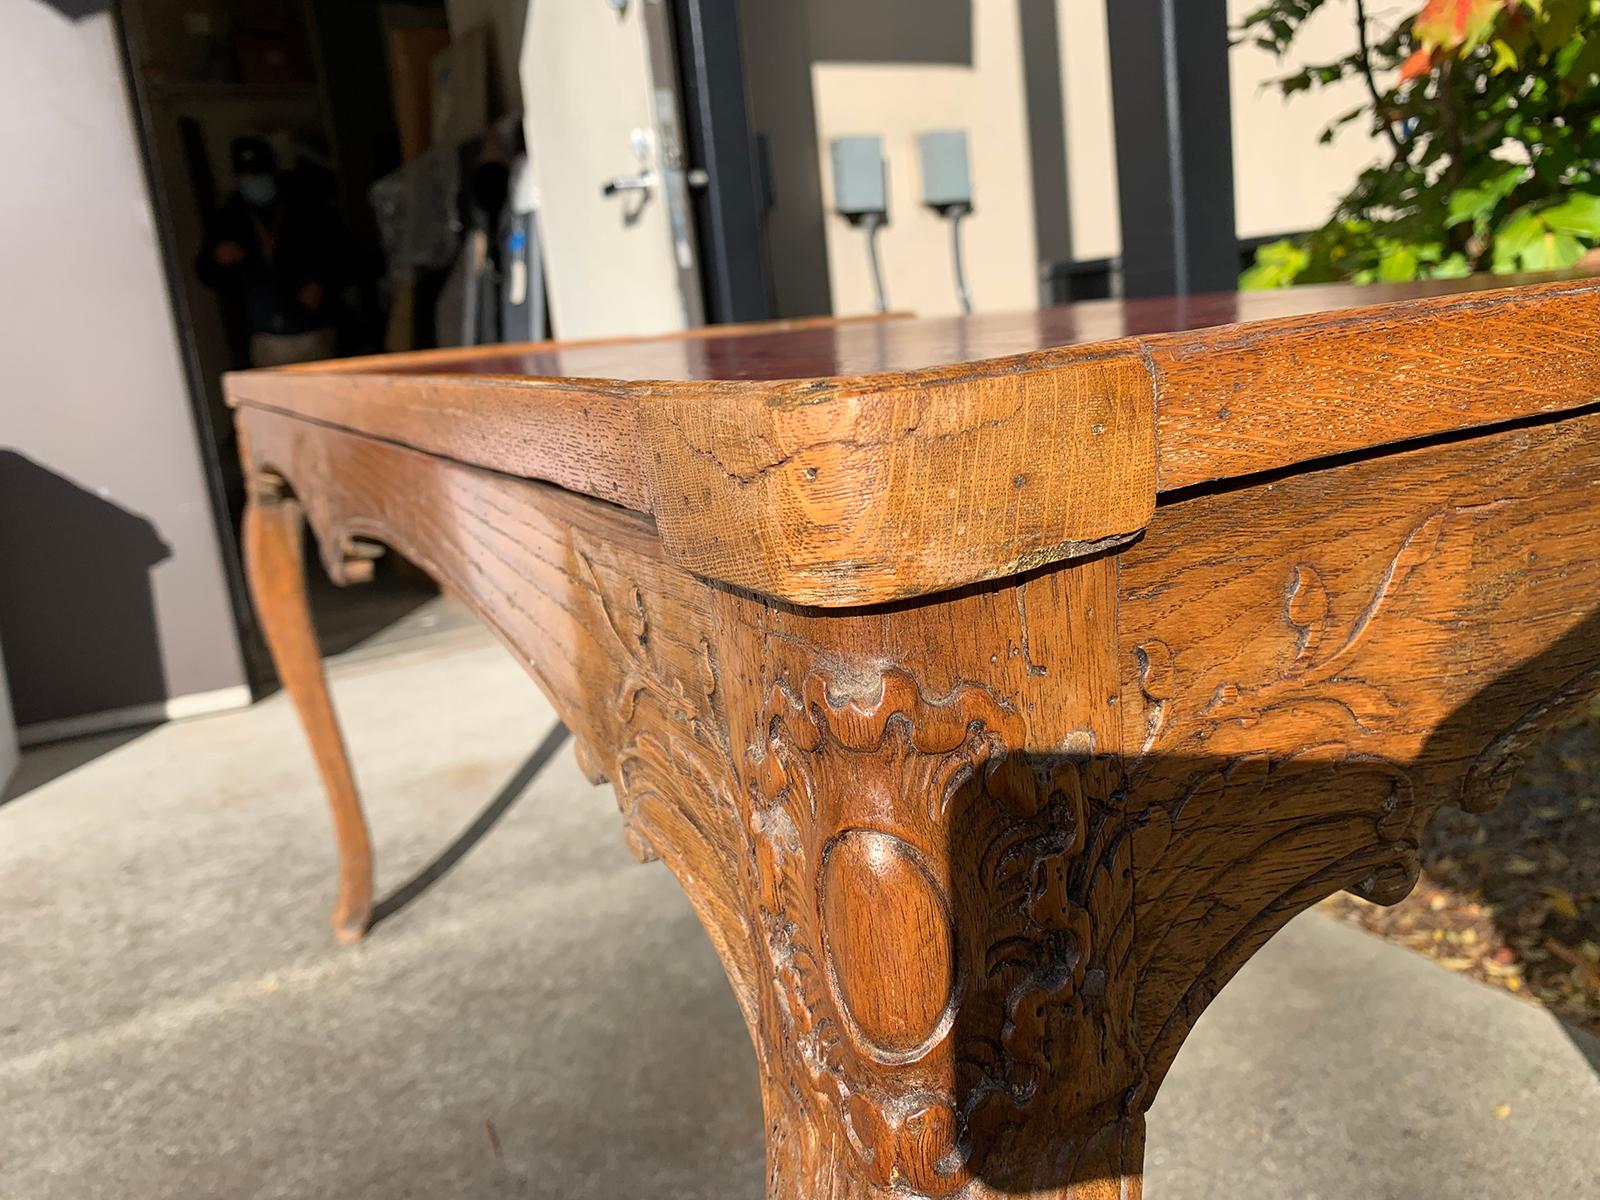 18th-19th Century French Louis XV Style Carved Tric-Trac Table with Leather Top For Sale 4